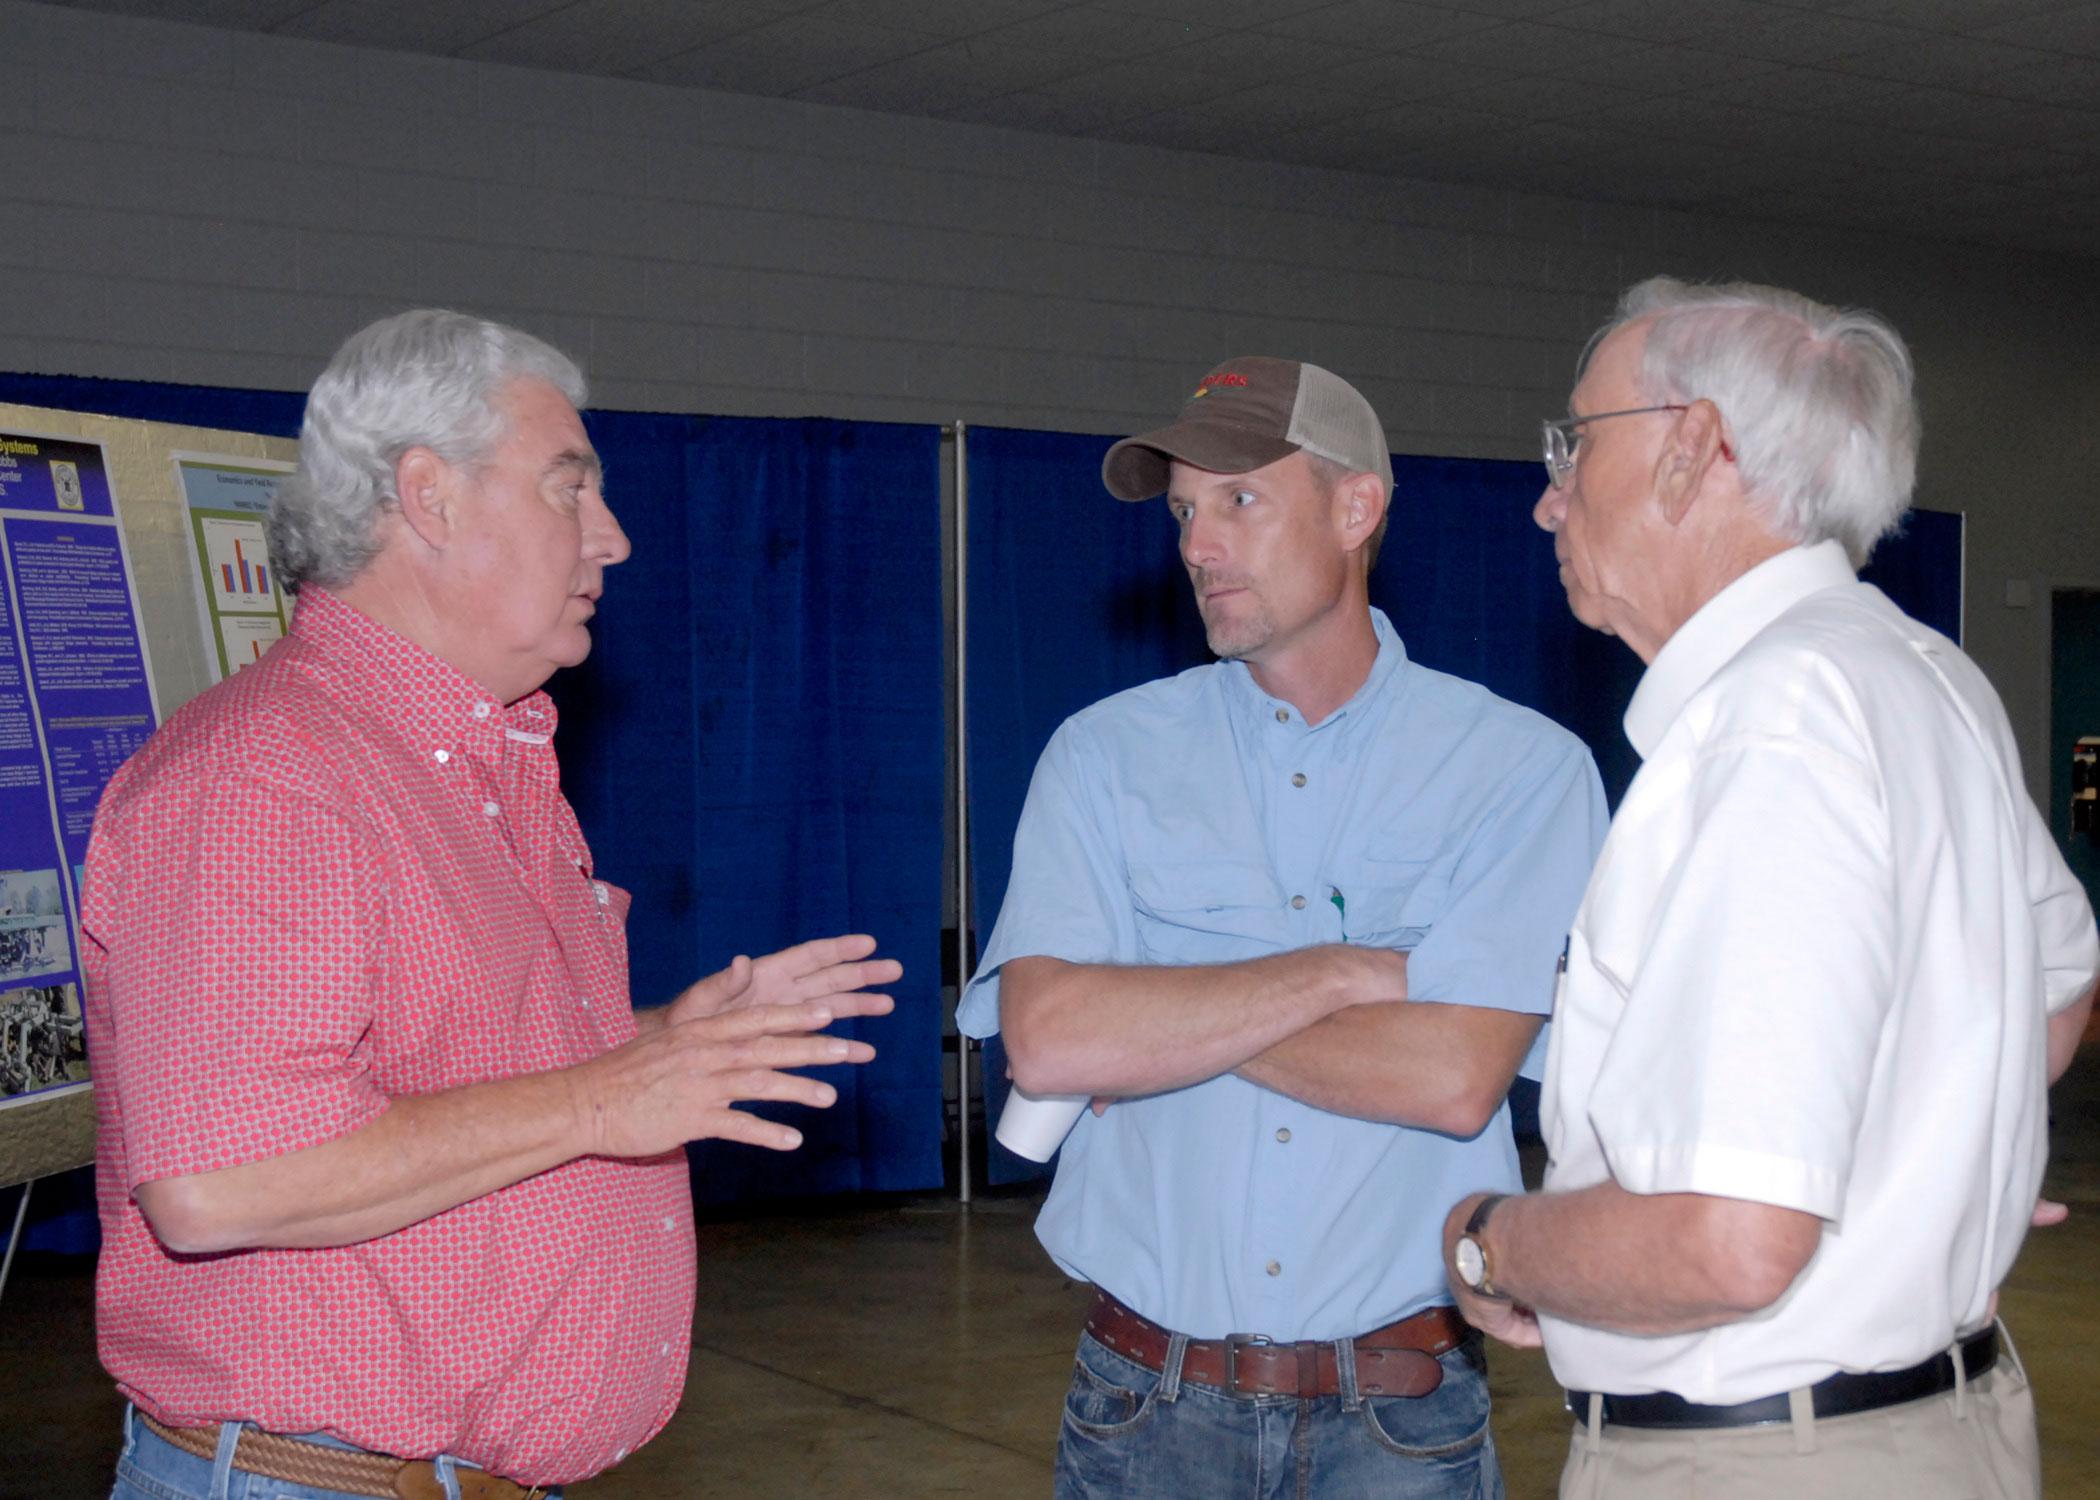 From left, Roger Worsham, a tillage equipment vendor, reviews tillage options with Glenn Gilmer, a farmer from Caledonia, and Normie Buehring, a research professor with the Mississippi Agricultural and Forestry Experiment Station. The three were taking part in the North Mississippi Row Crops Field Day Aug. 9, 2012, at the North Mississippi Research and Extension Center in Verona. (Photo by MSU Ag Communications/Linda Breazeale)